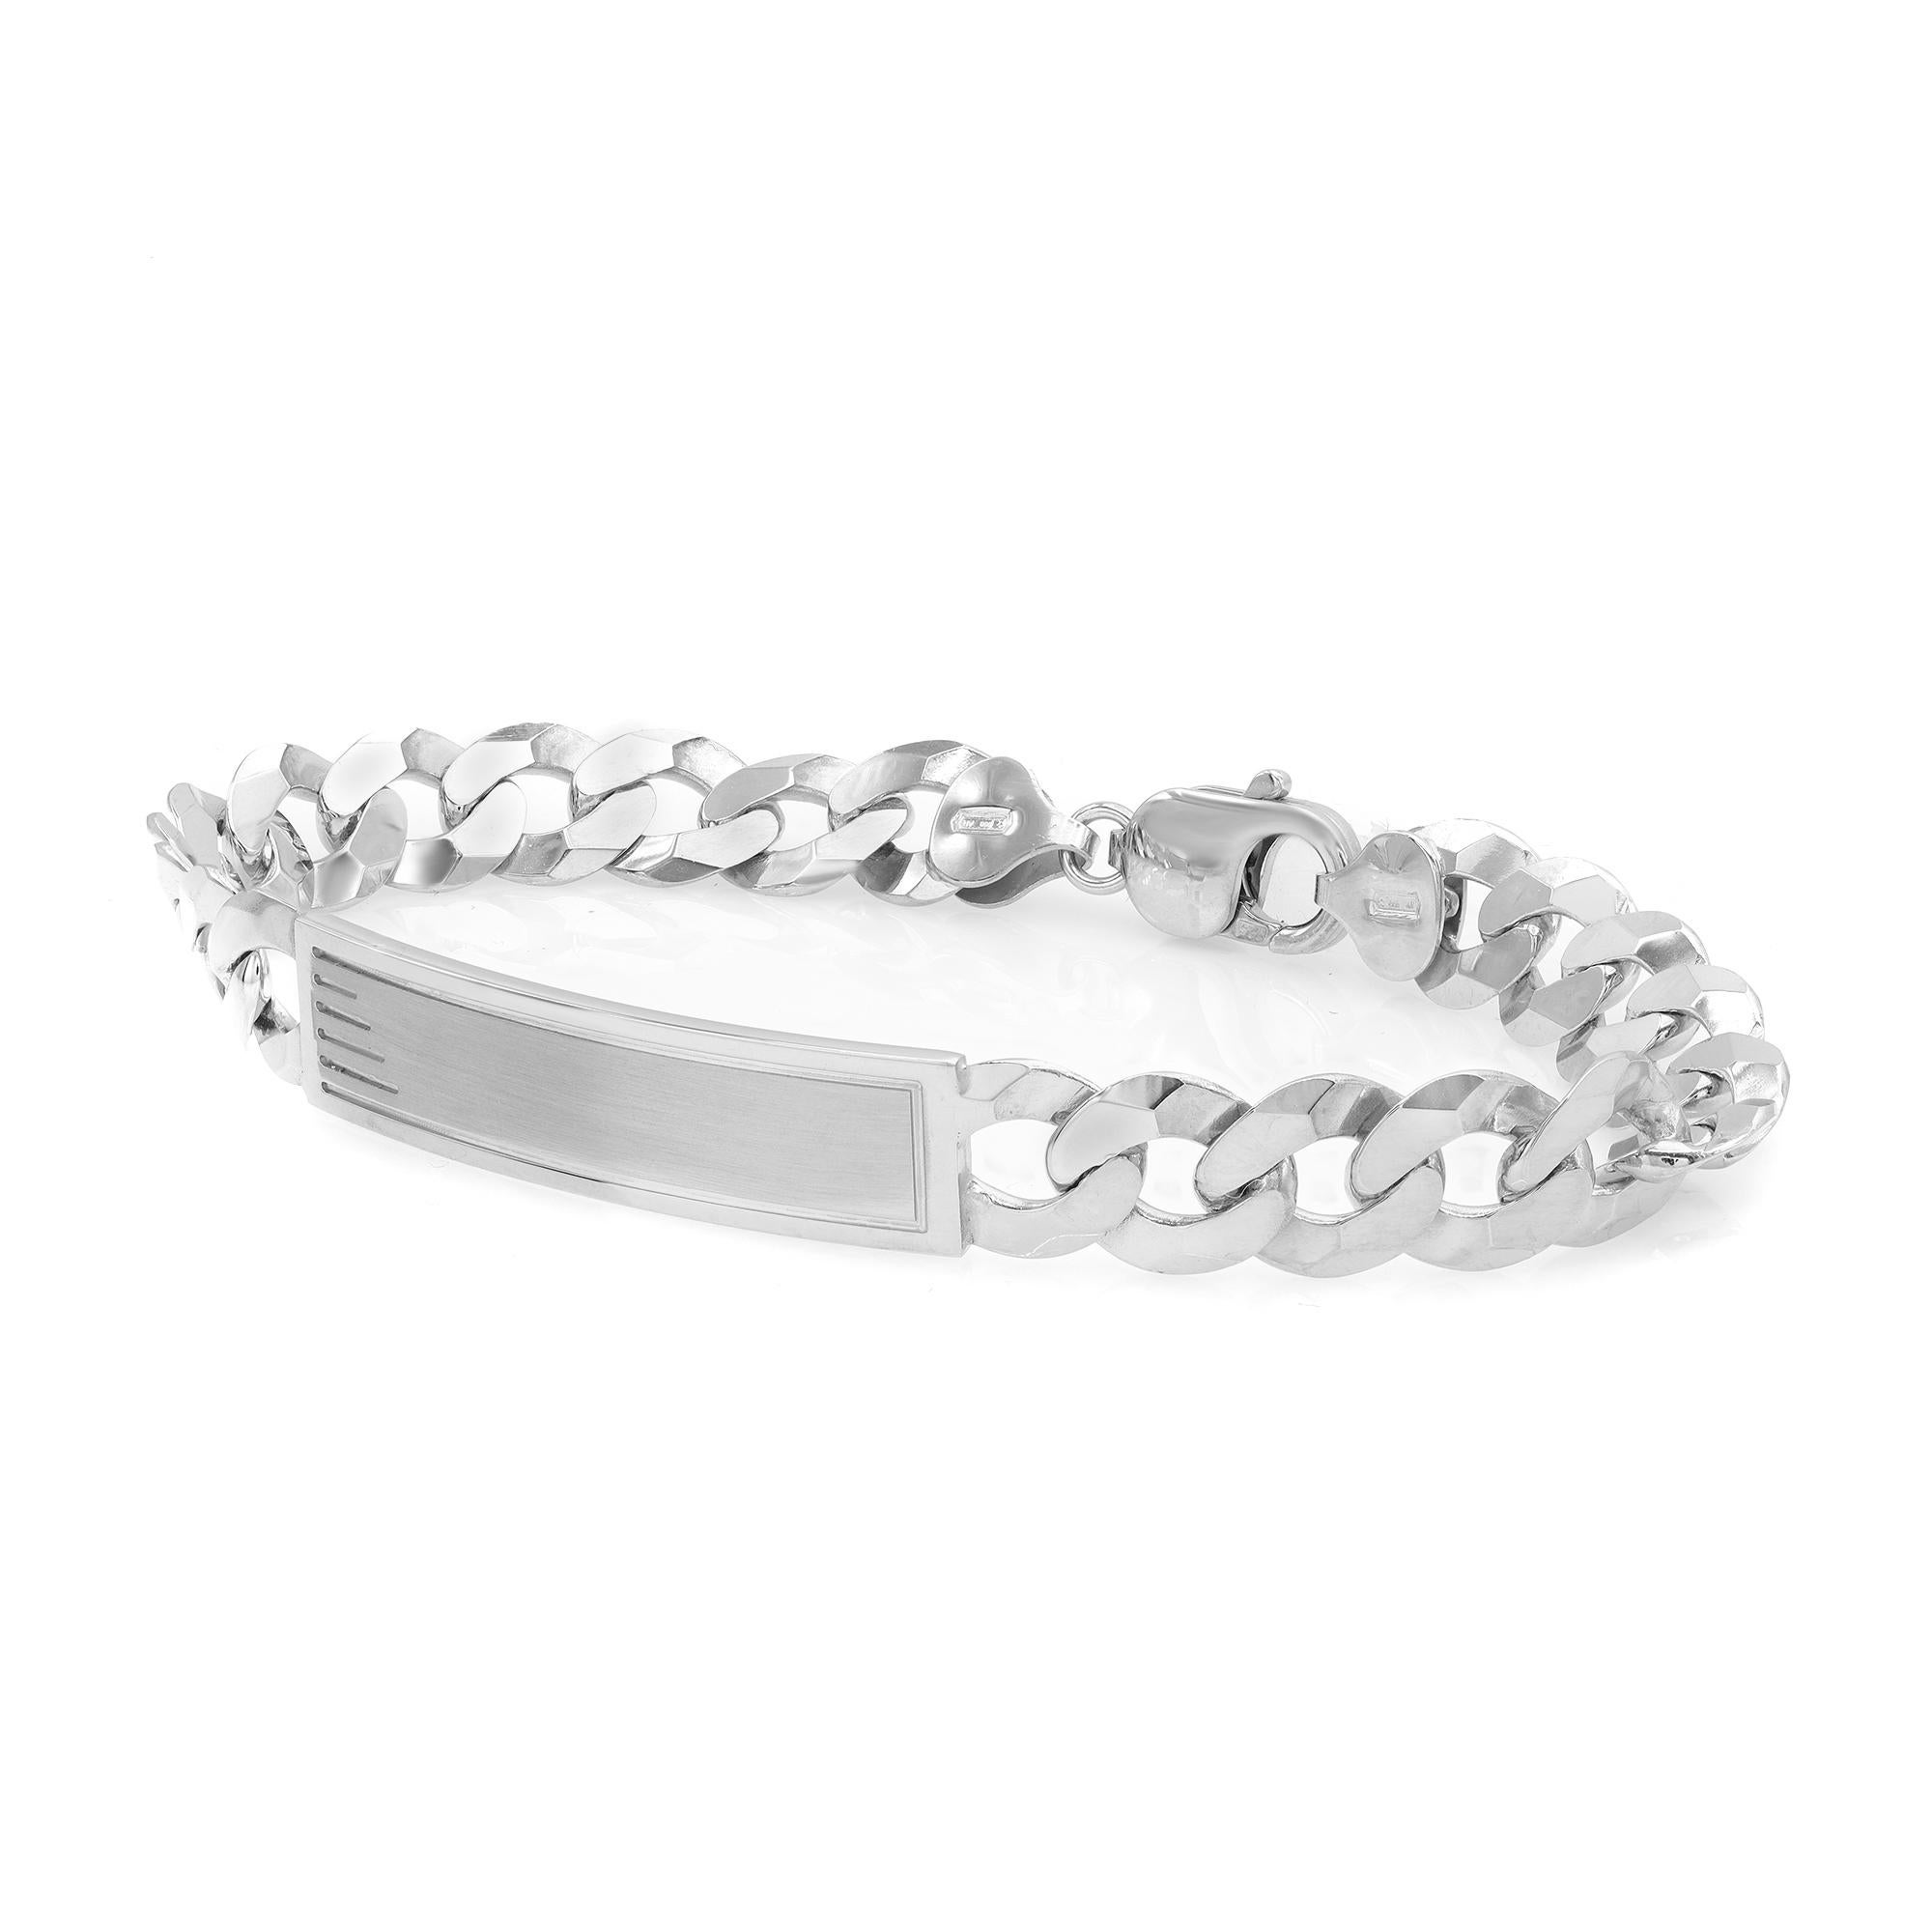 Make an elegant statement with our simple and appealing mens ID bracelet. This popular style bracelet is a must have accessory. Features a curb cuban link chain with a curved id tag at the center. Showcases a lustrous and smooth polished finish.